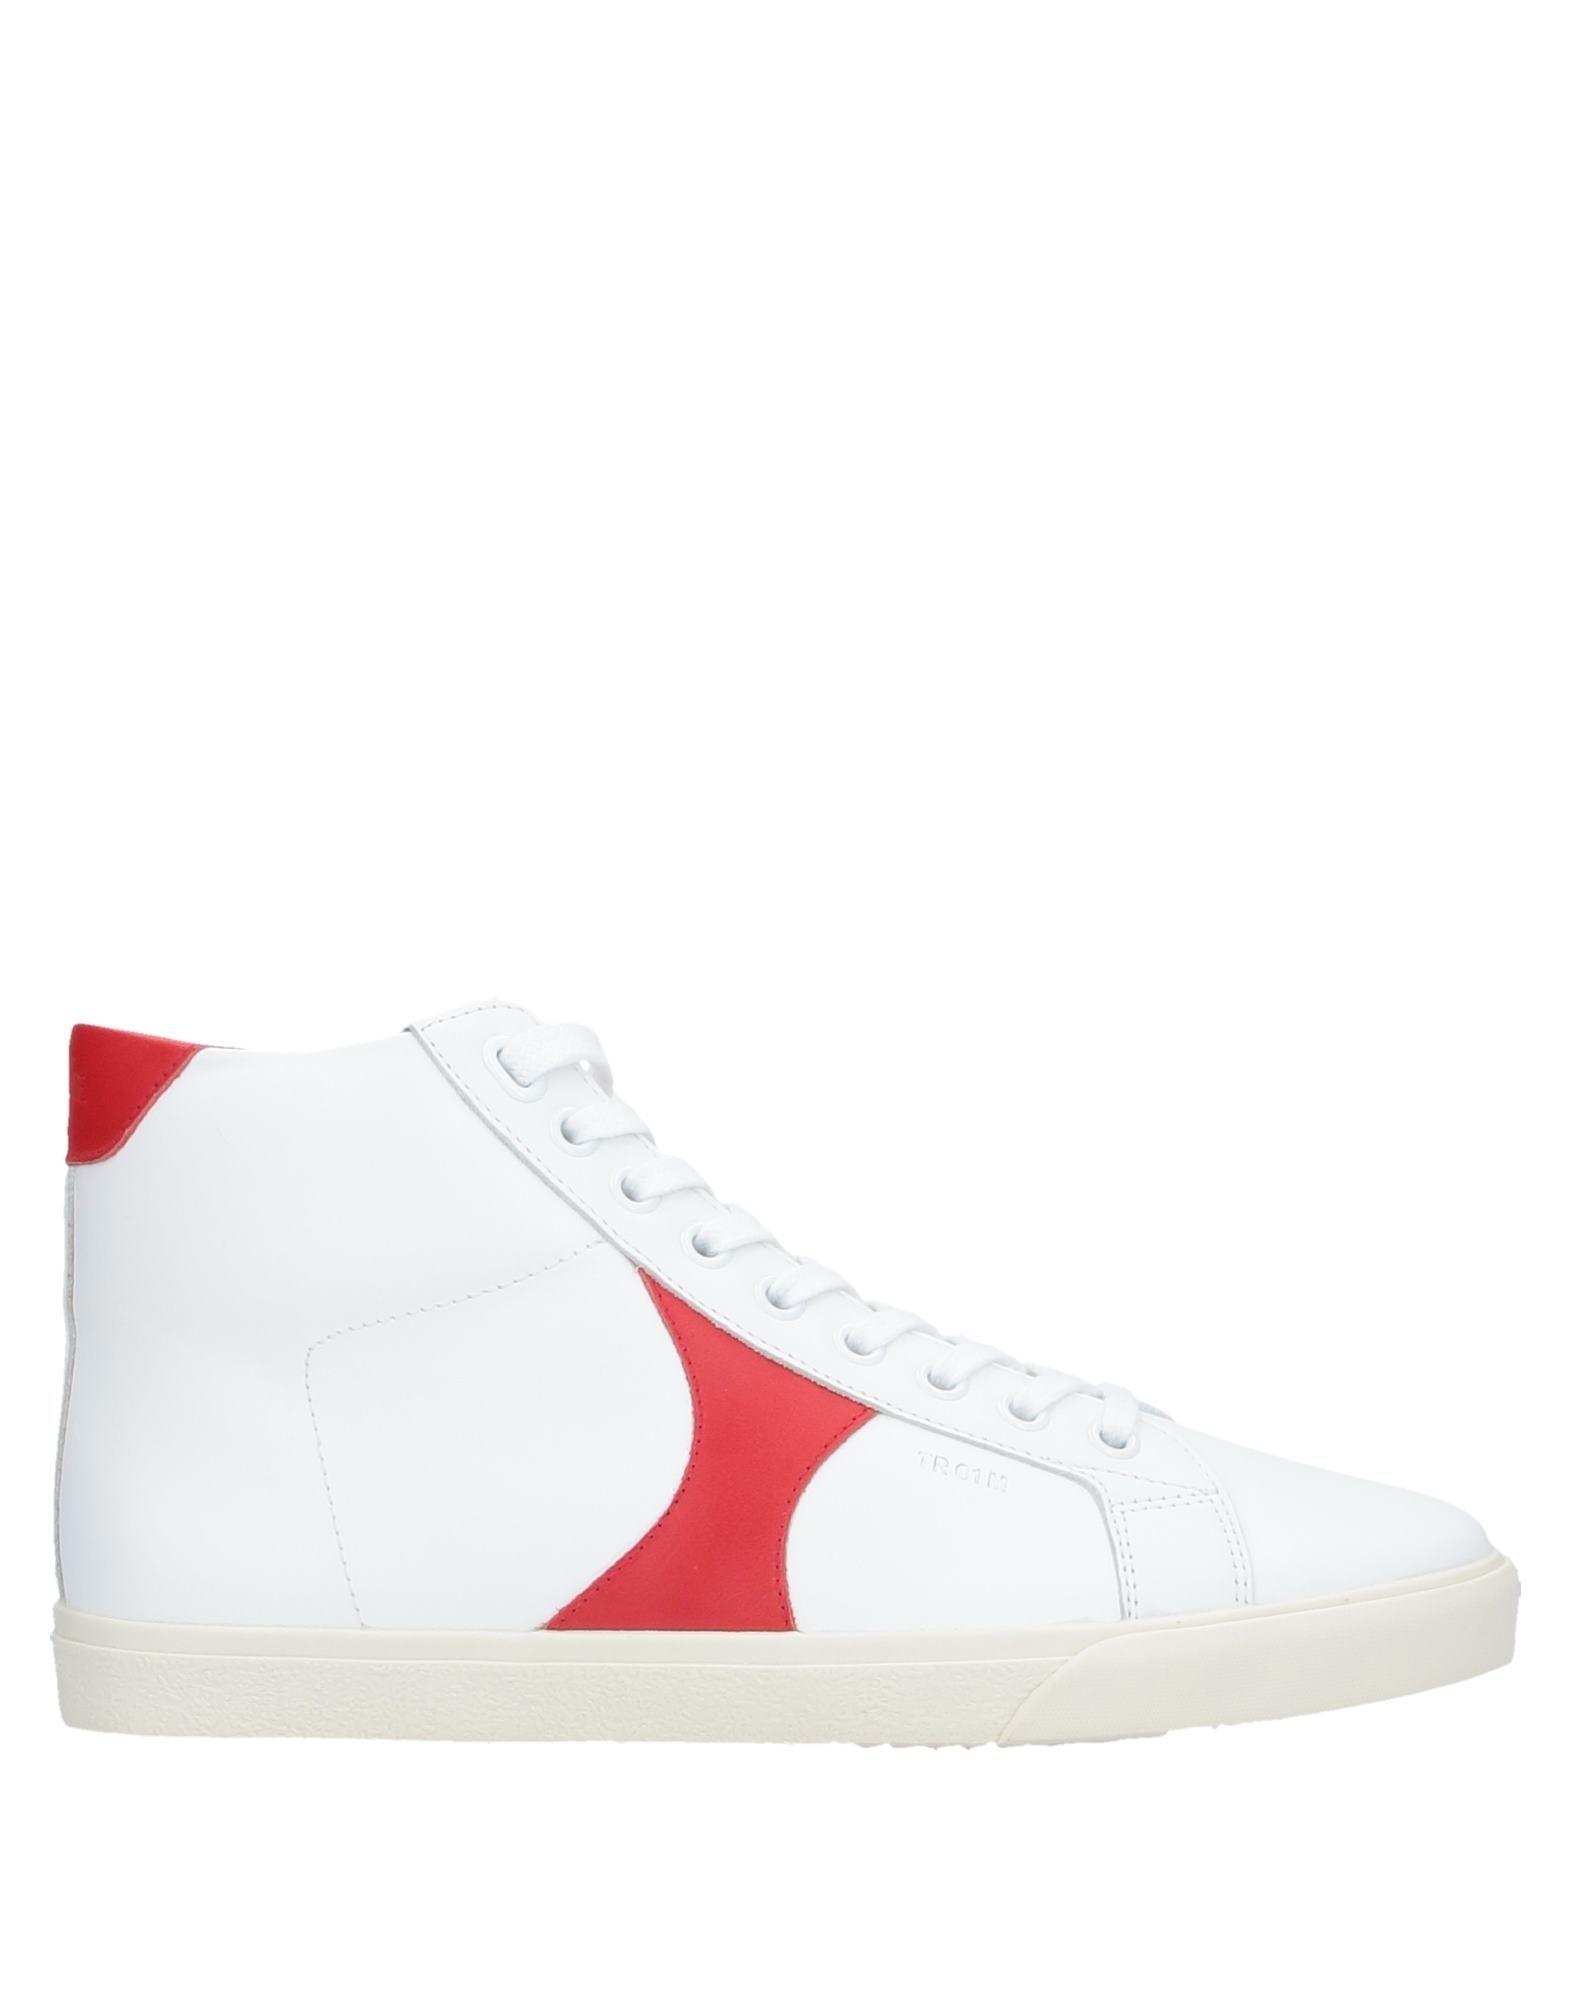 Celine Leather High-tops & Sneakers in White - Lyst